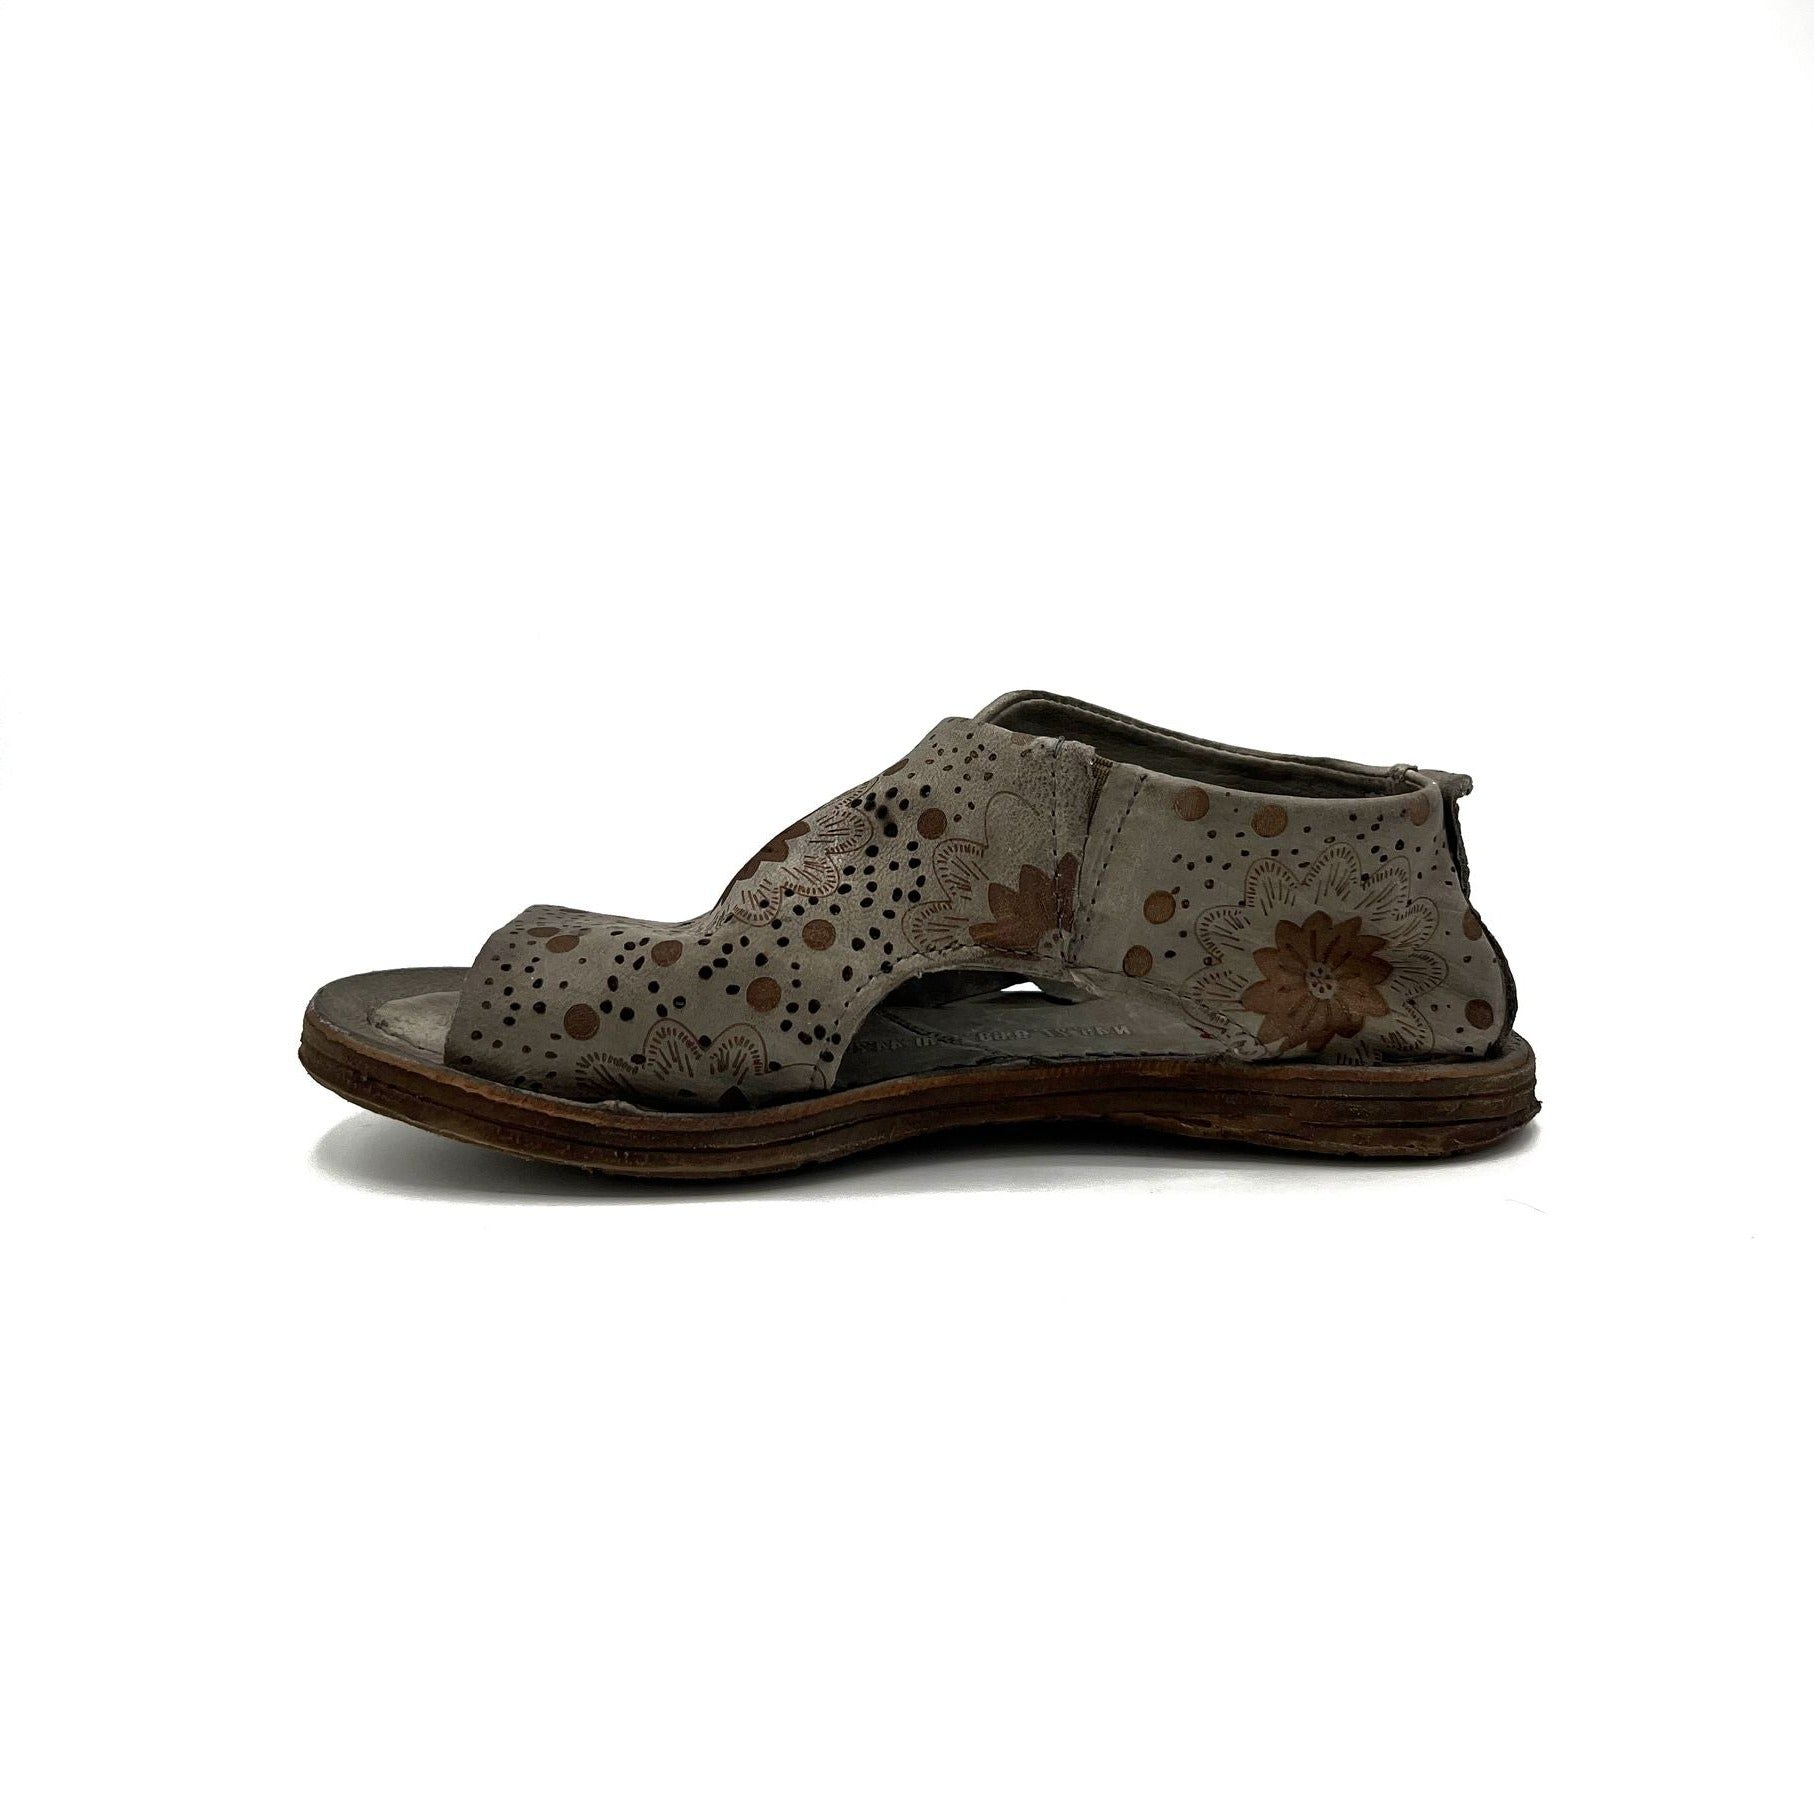 inner side view of the as98 ronald flat. This shoe is grey with an embossed, brown, floral pattern. the shoe has an open toe with the rest of the foot being covered by leather.